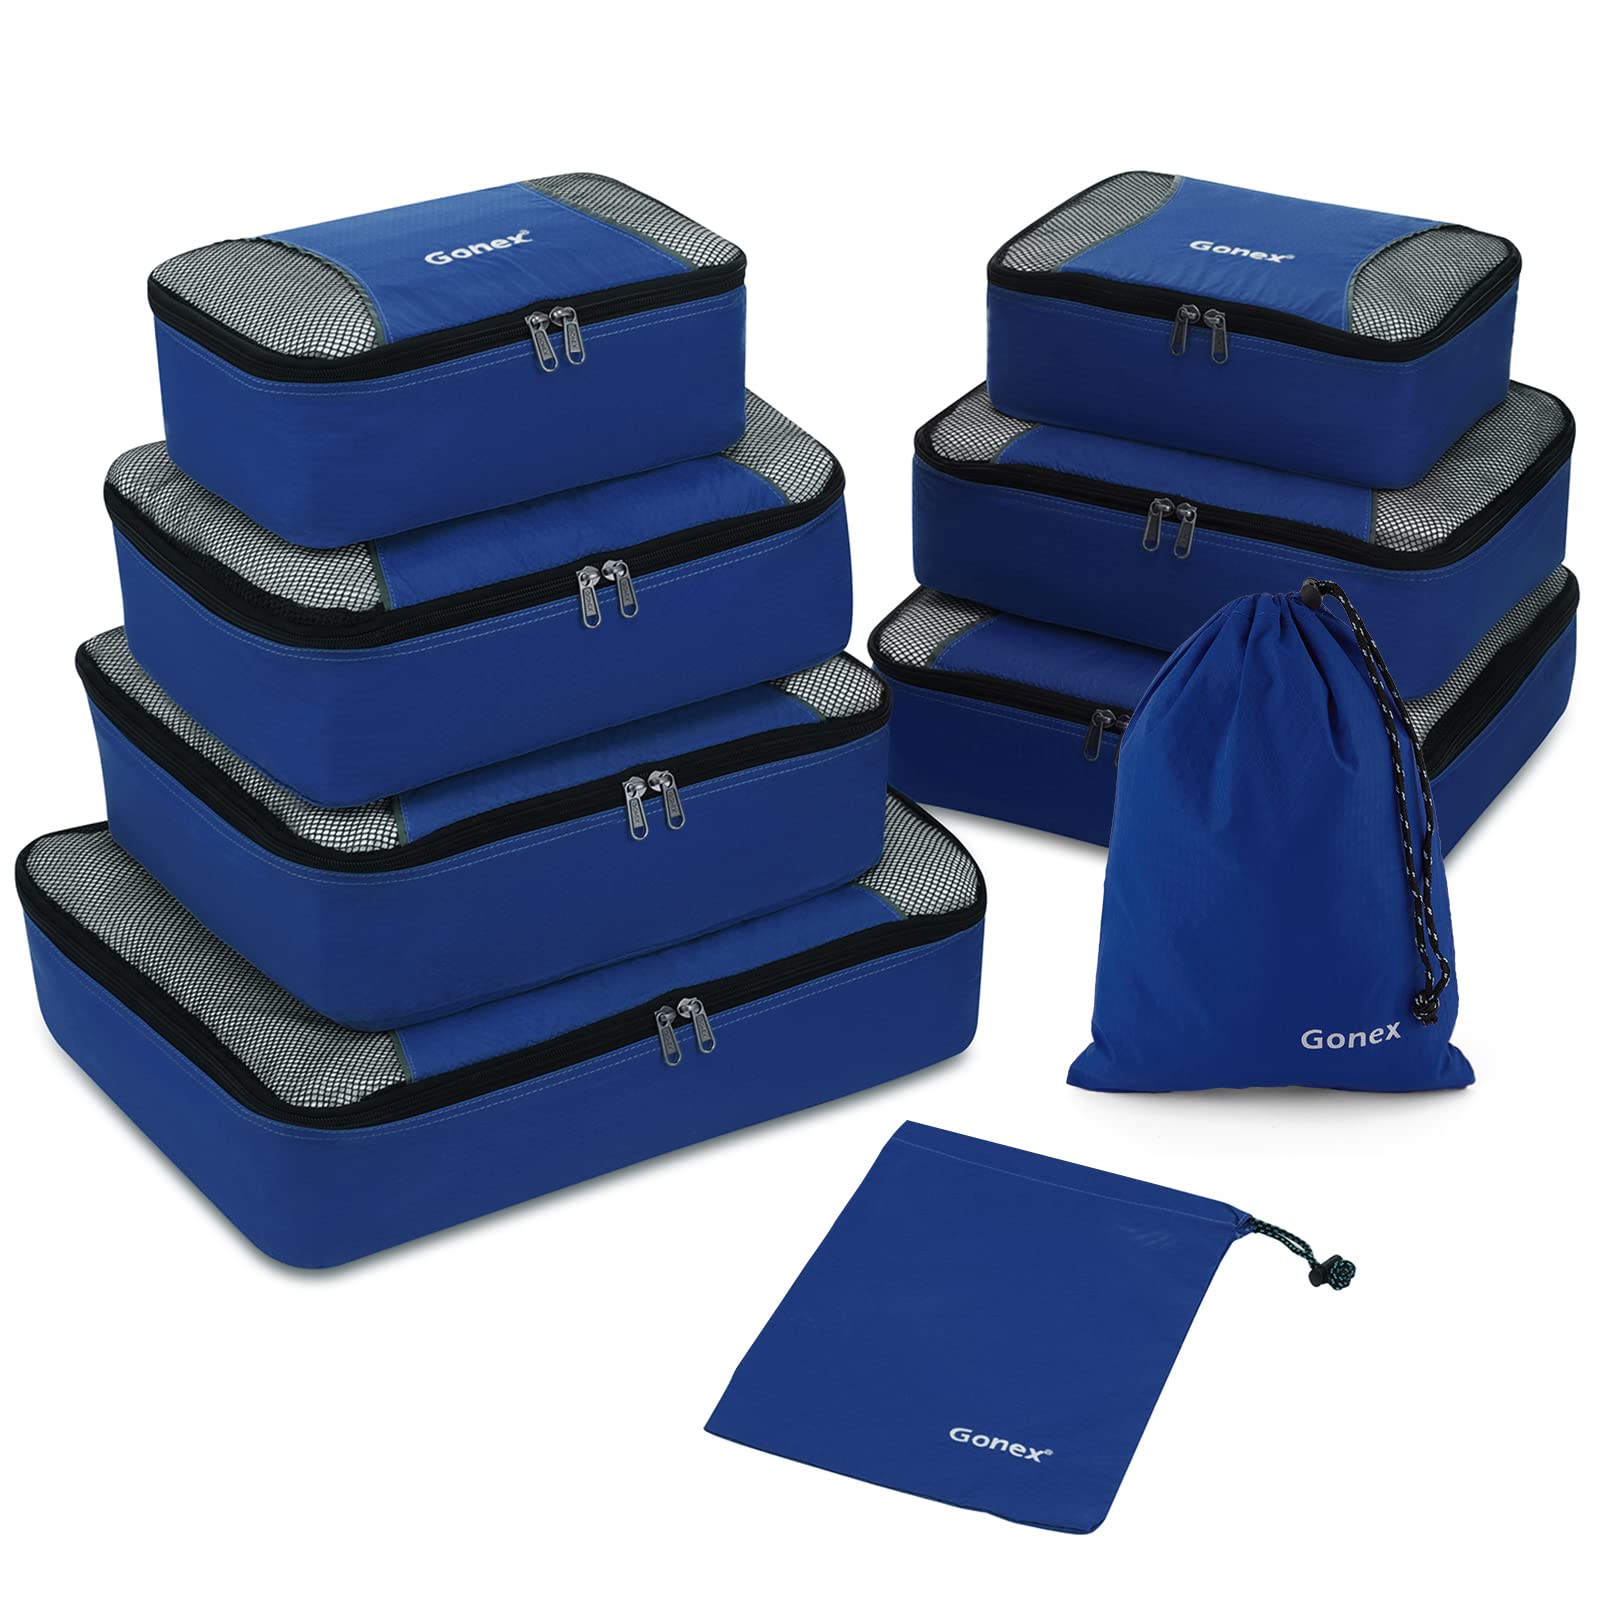 Set of blue Gonex packing cubes with Compression Cubes for organized luggage.